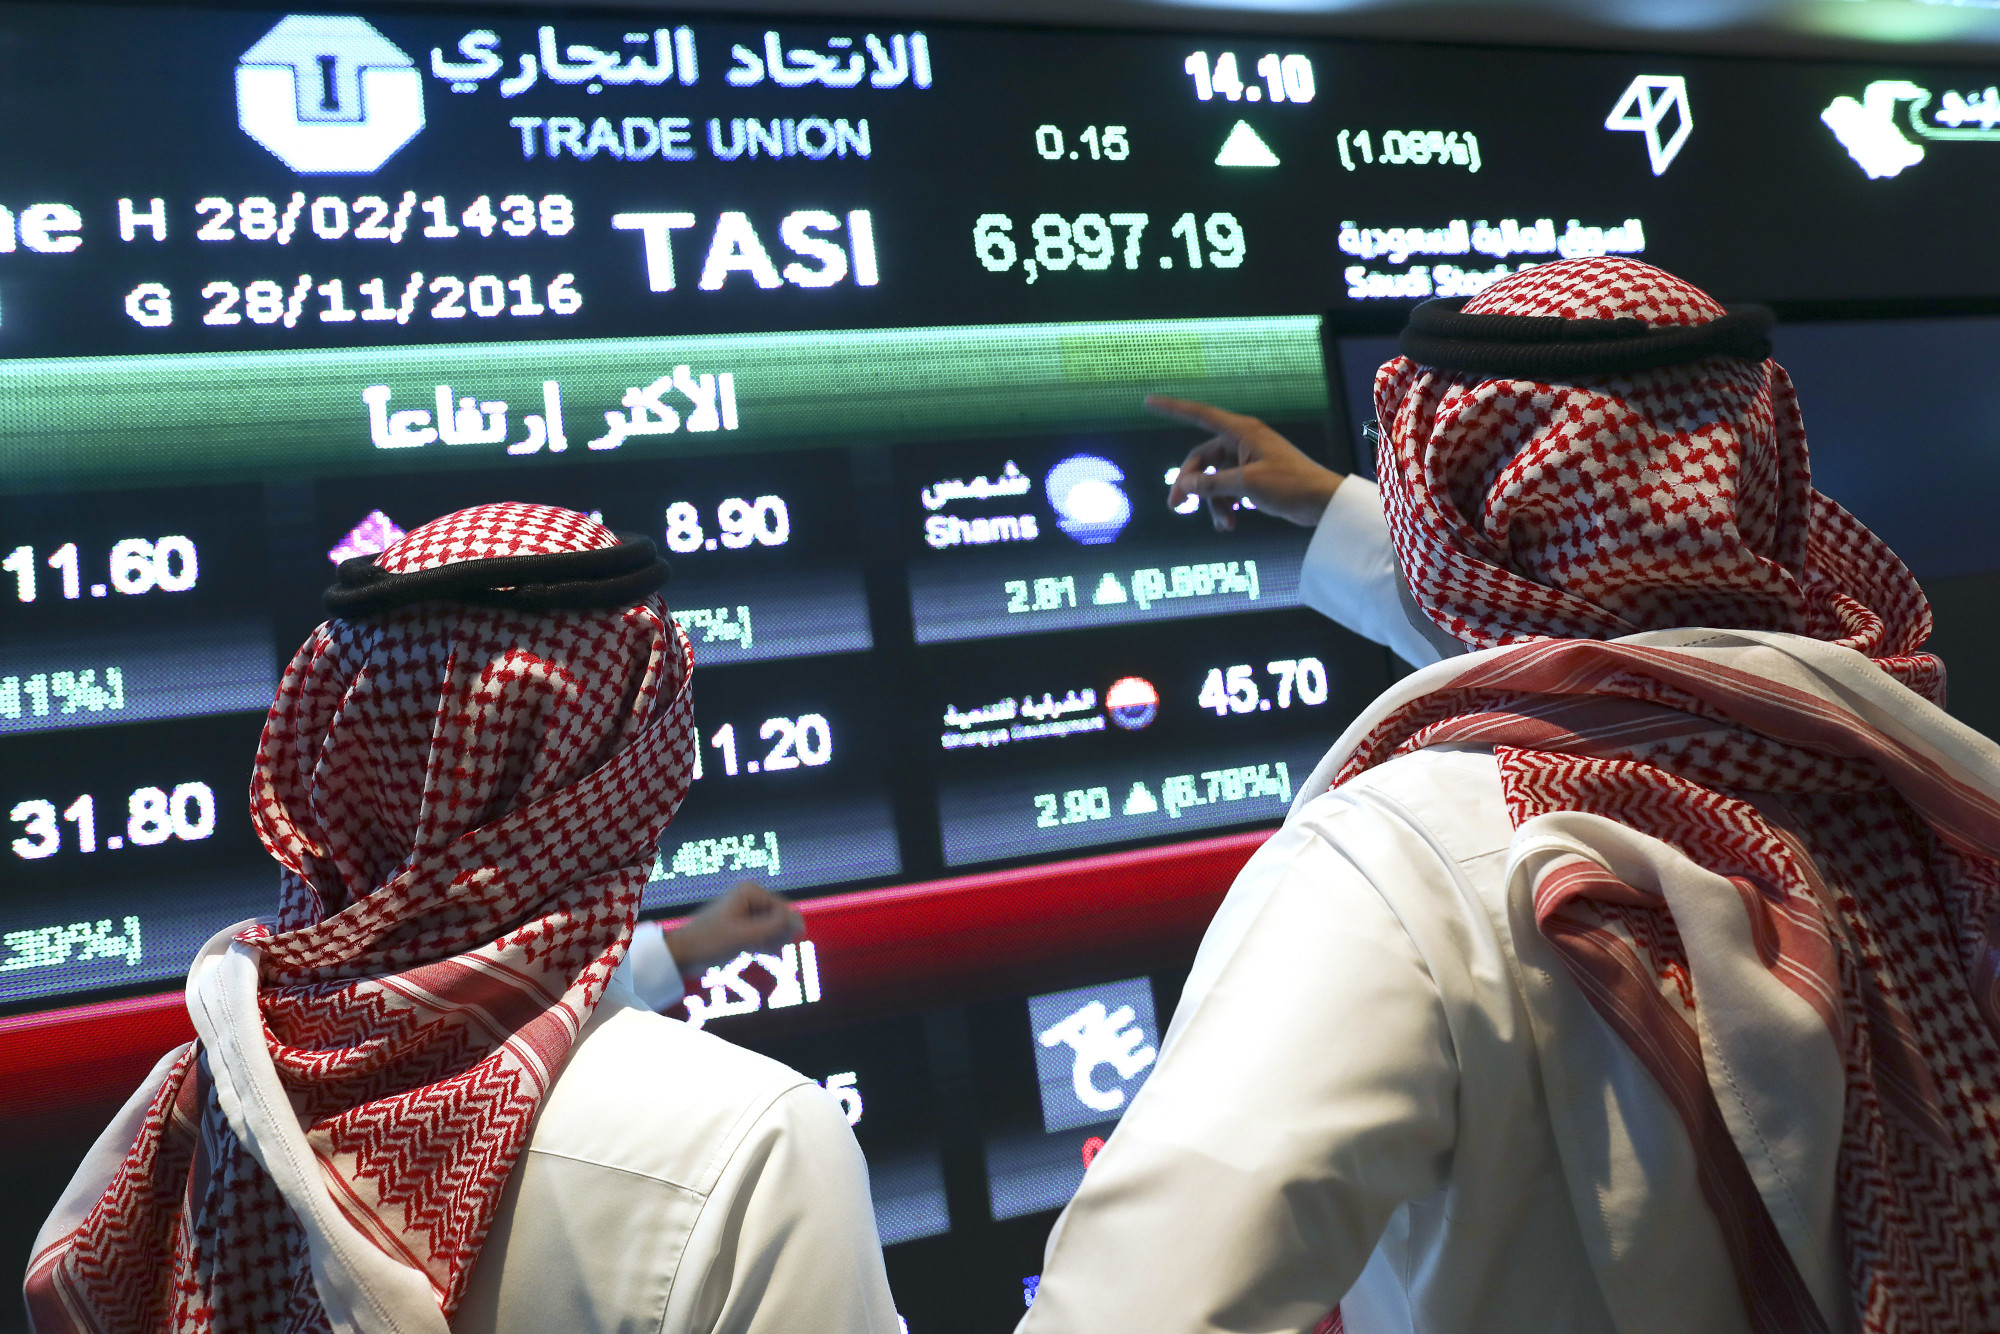 Visitors stand and watch stock movements displayed&nbsp;inside the Saudi Stock Exchange.